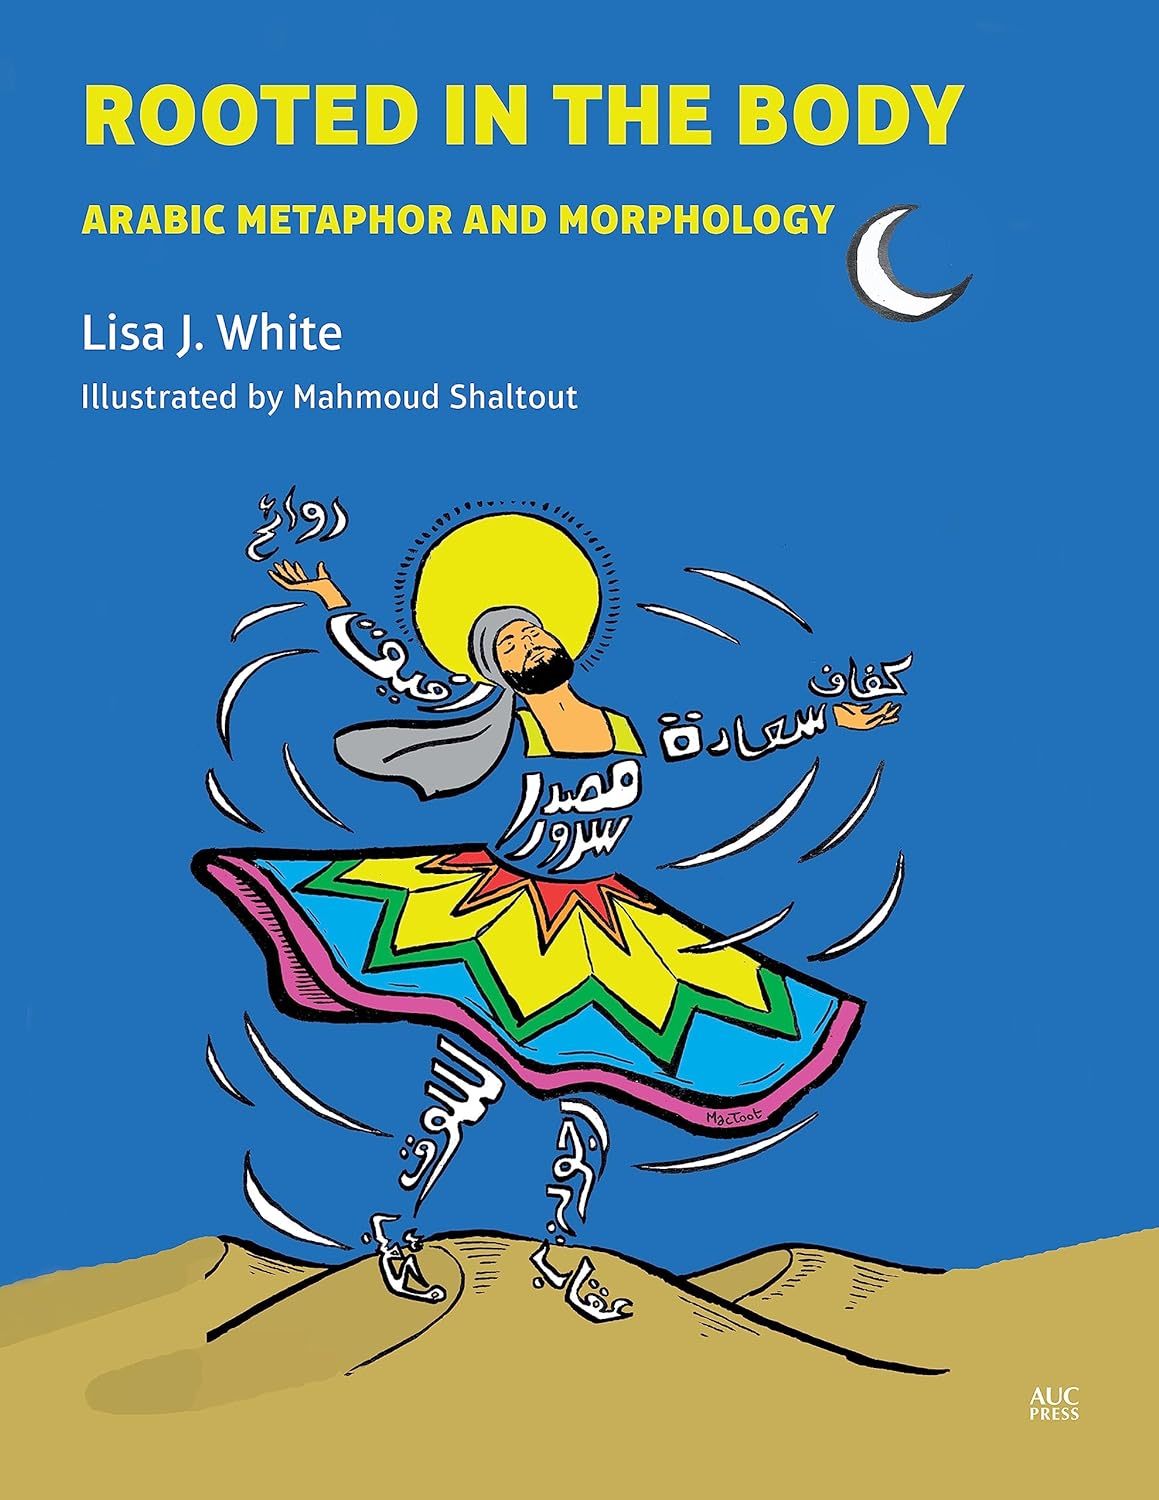 Rooted in the Body - Arabic Metaphor and Morphology - Hard Cover